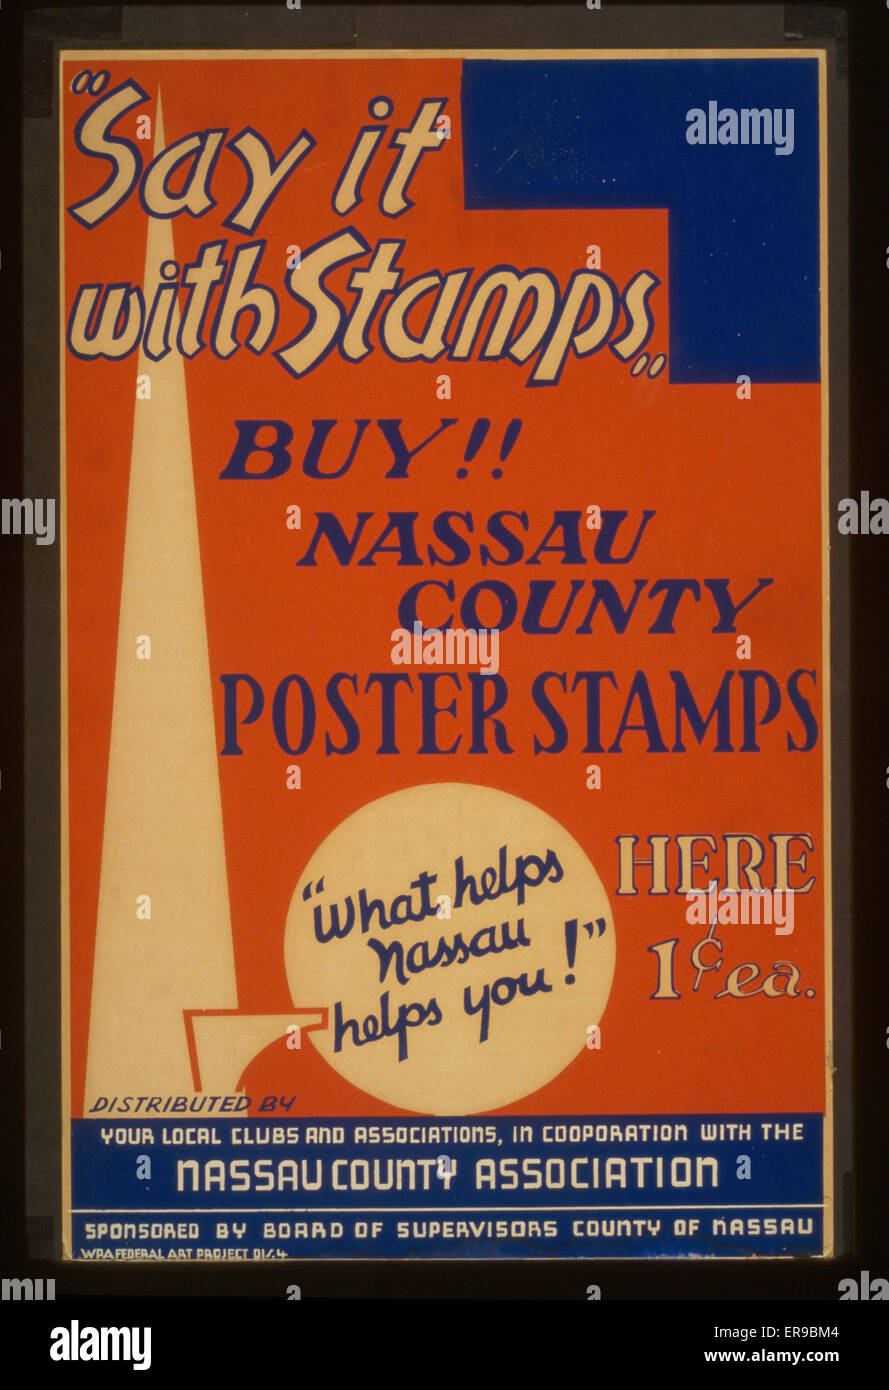 Say it with stamps Buy!! Nassau County poster stamps : What Stock Photo